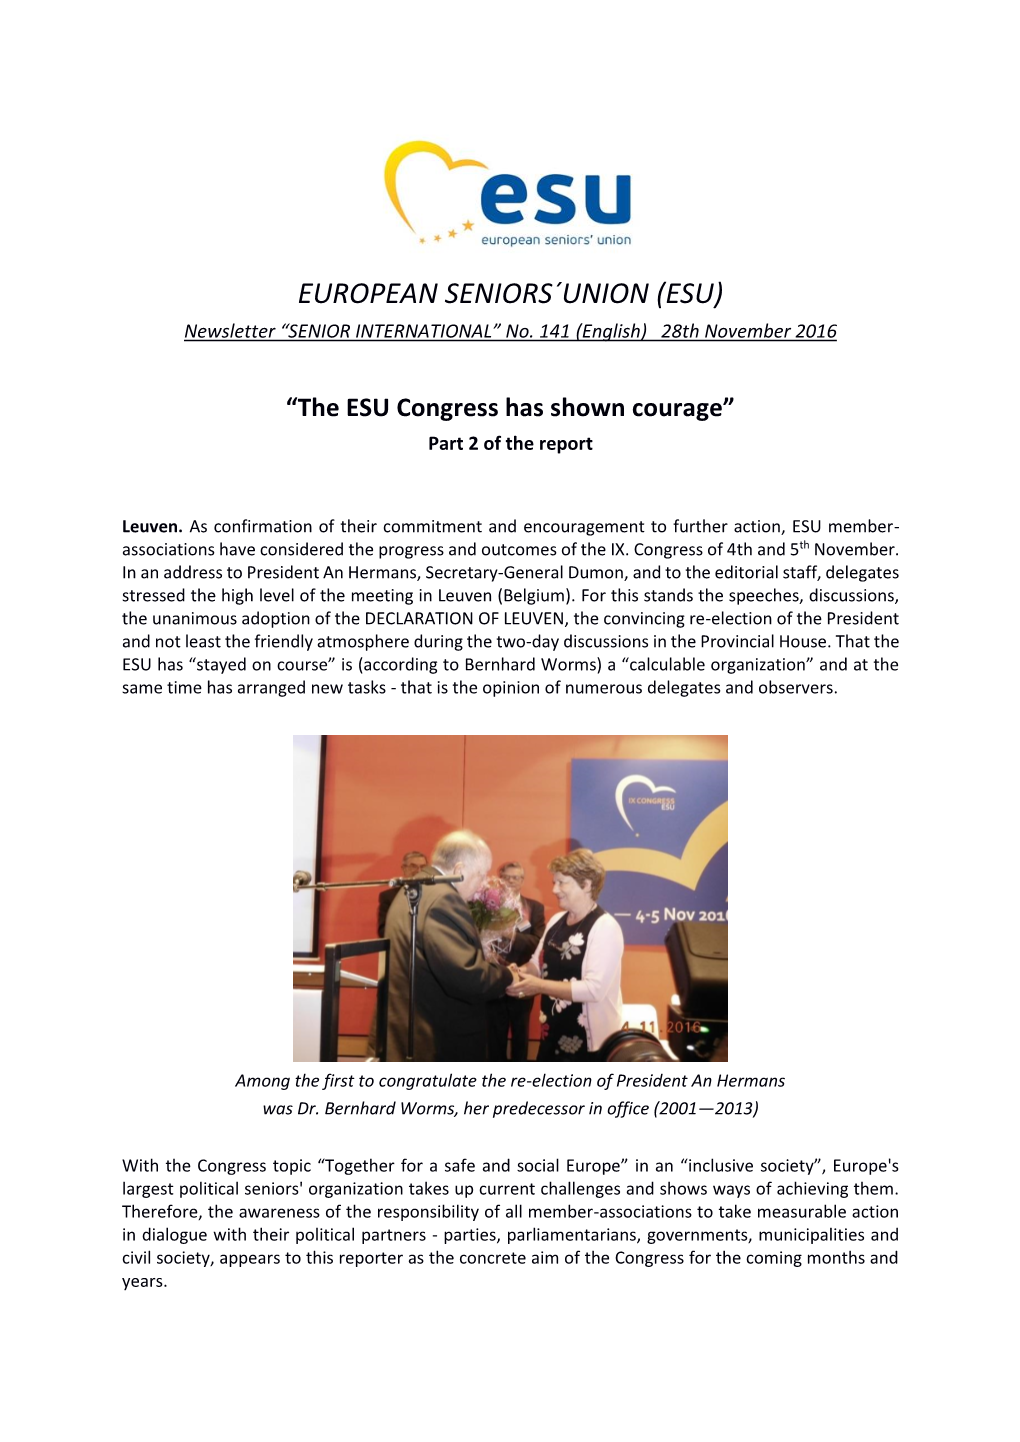 The ESU Congress Has Shown Courage” Part 2 of the Report